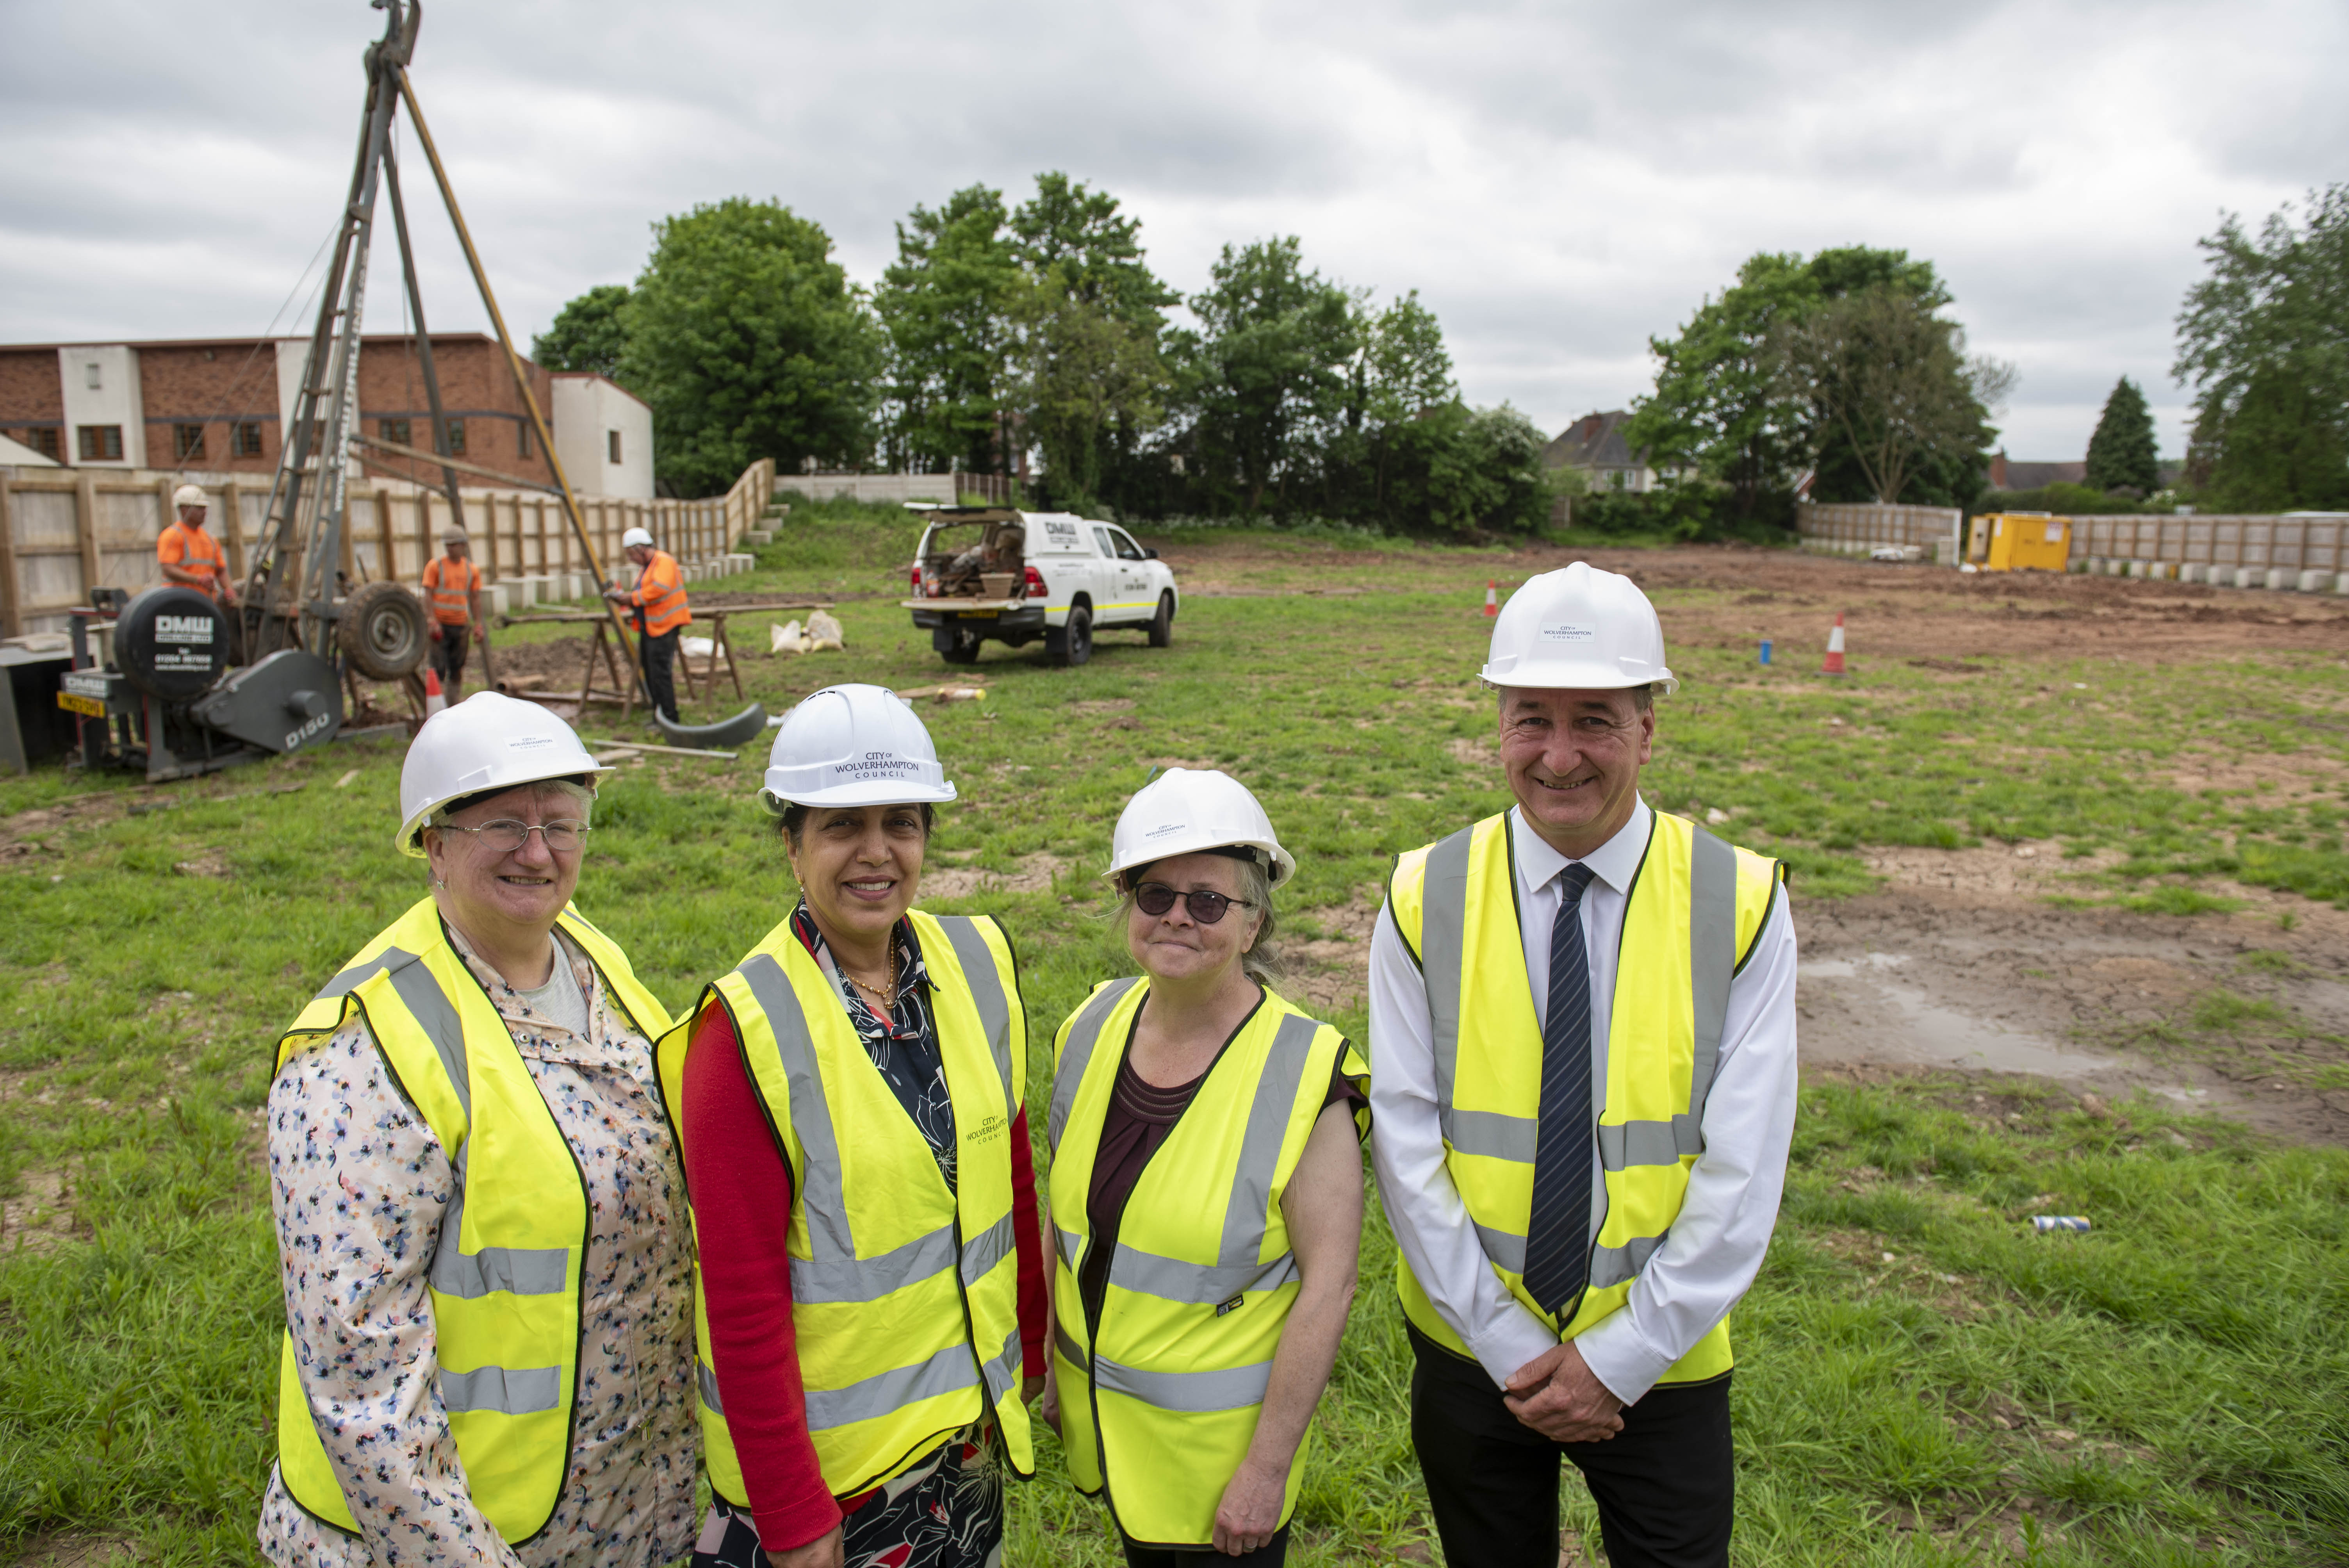 From L-R: Marie Lane, Chair of the Patient Participation Group; Cllr Jasbir Jaspal, Cabinet Member for Adults and Wellbeing, Tracy Dunne, Chair of the Rakegate Tenants and Residents Association, and Cllr Steve Evans, Deputy Leader and Cabinet Member for Housing, observe the start of the site investigation works at the Oxley site.